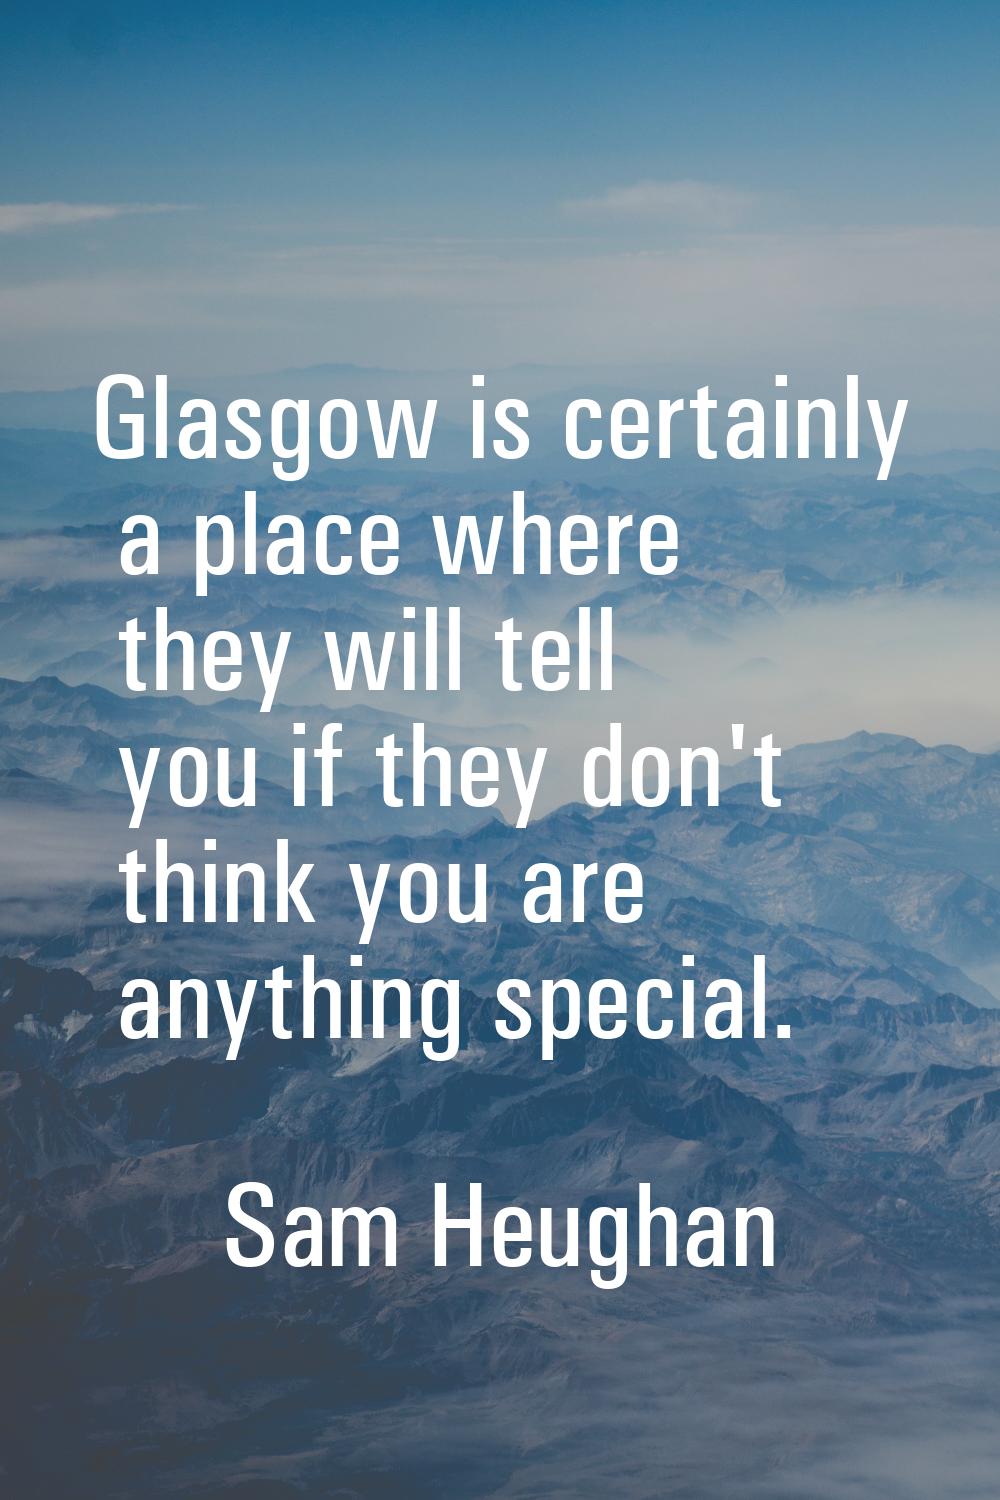 Glasgow is certainly a place where they will tell you if they don't think you are anything special.